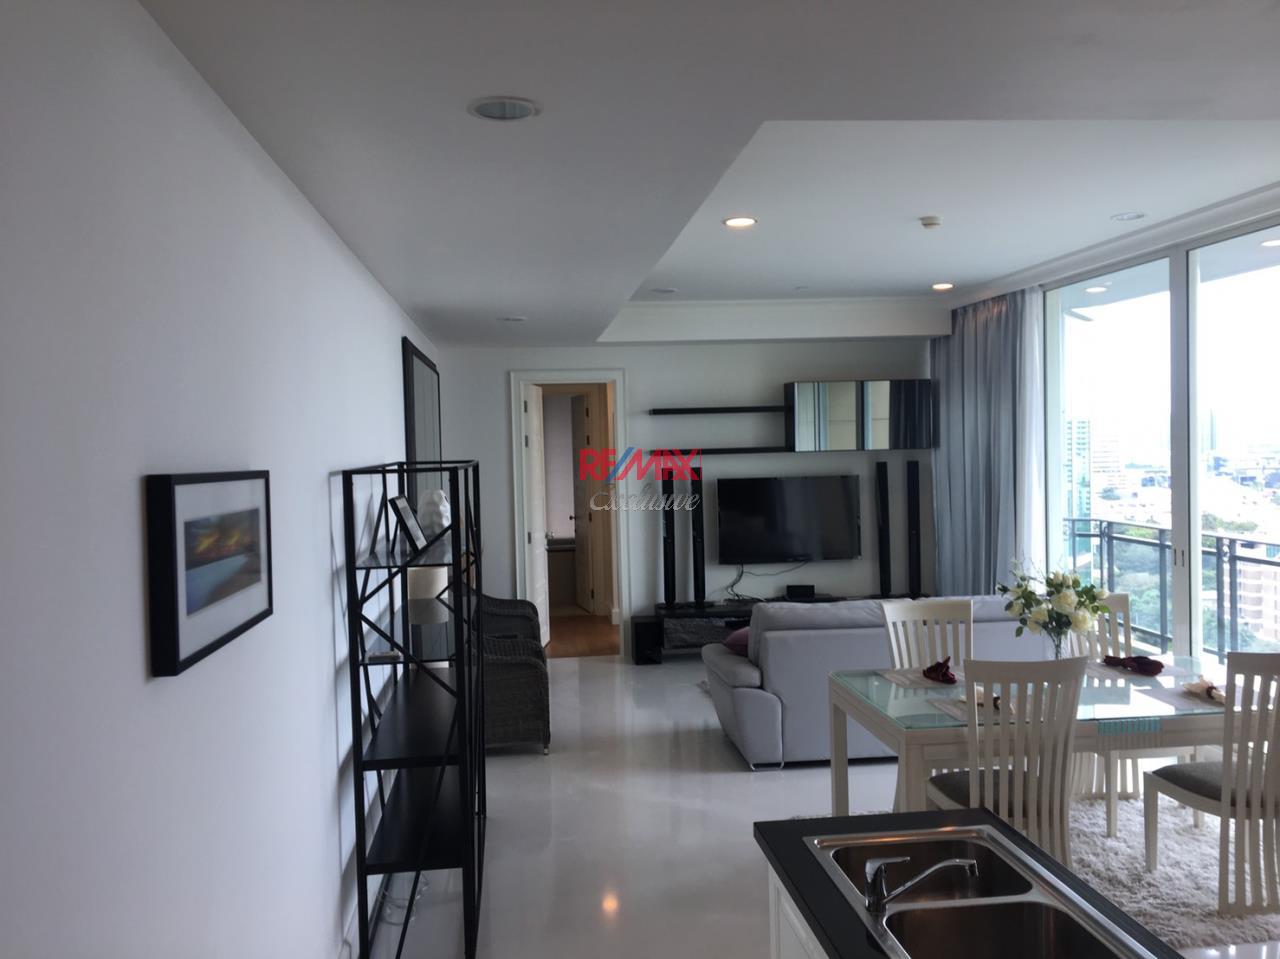 RE/MAX Exclusive Agency's ROYCE RESIDENCE, 2 BEDROOM, 112 SQM - FOR RENT 80,000 THB 2